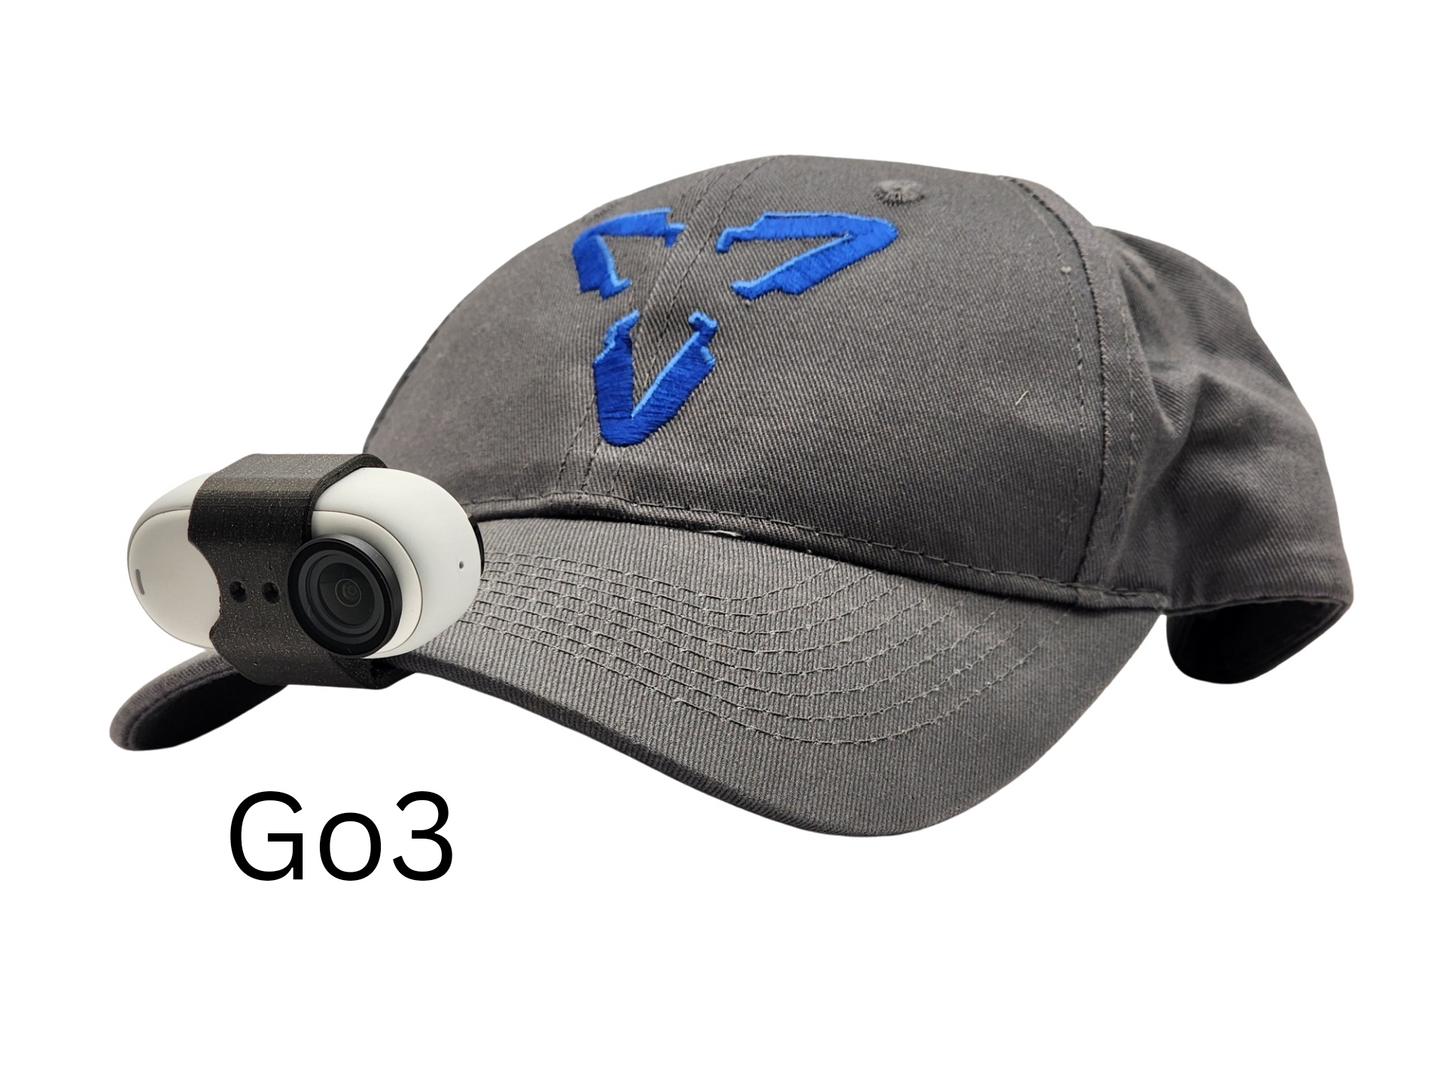 Heads Up - Insta360 Go2 and Go3 Hat Mount